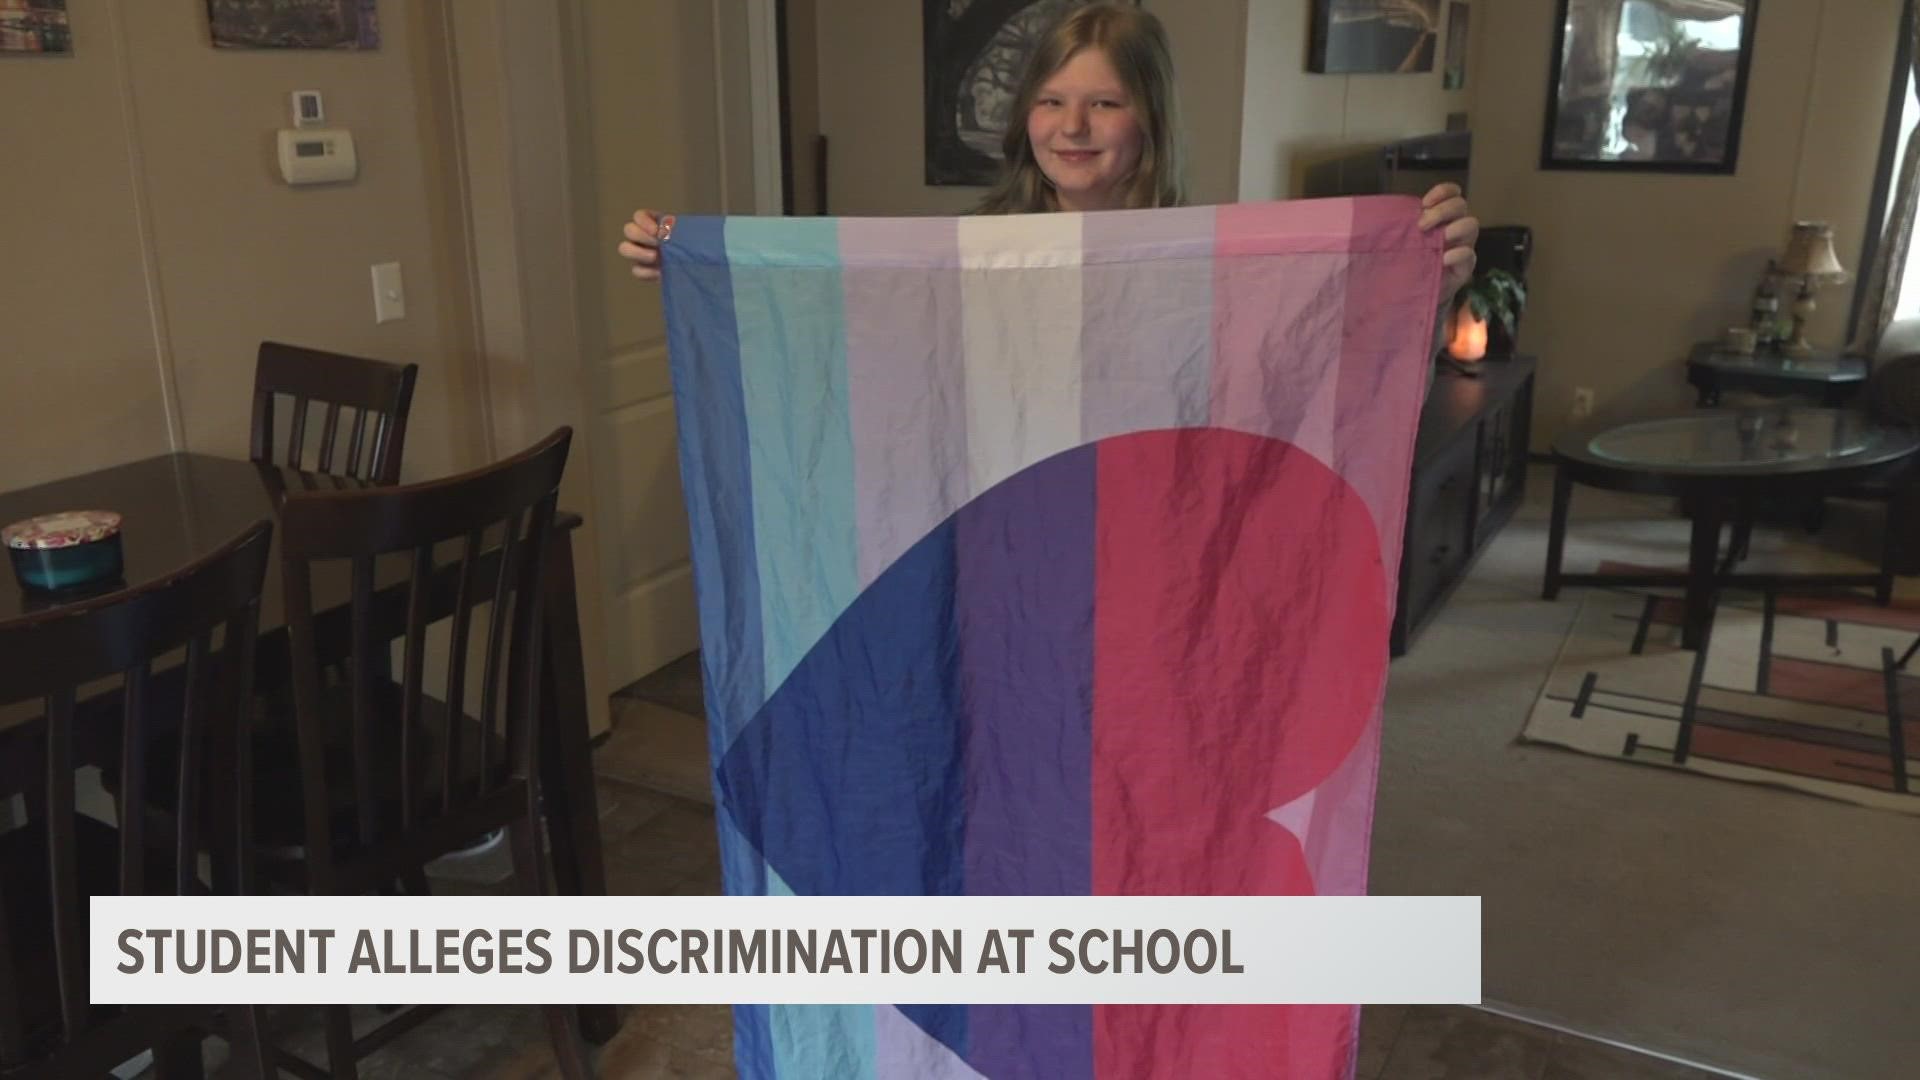 A Sparta mother claims her daughter was sent home early for wearing a flag supporting the LGBTQ community. The school says this wasn't the case.